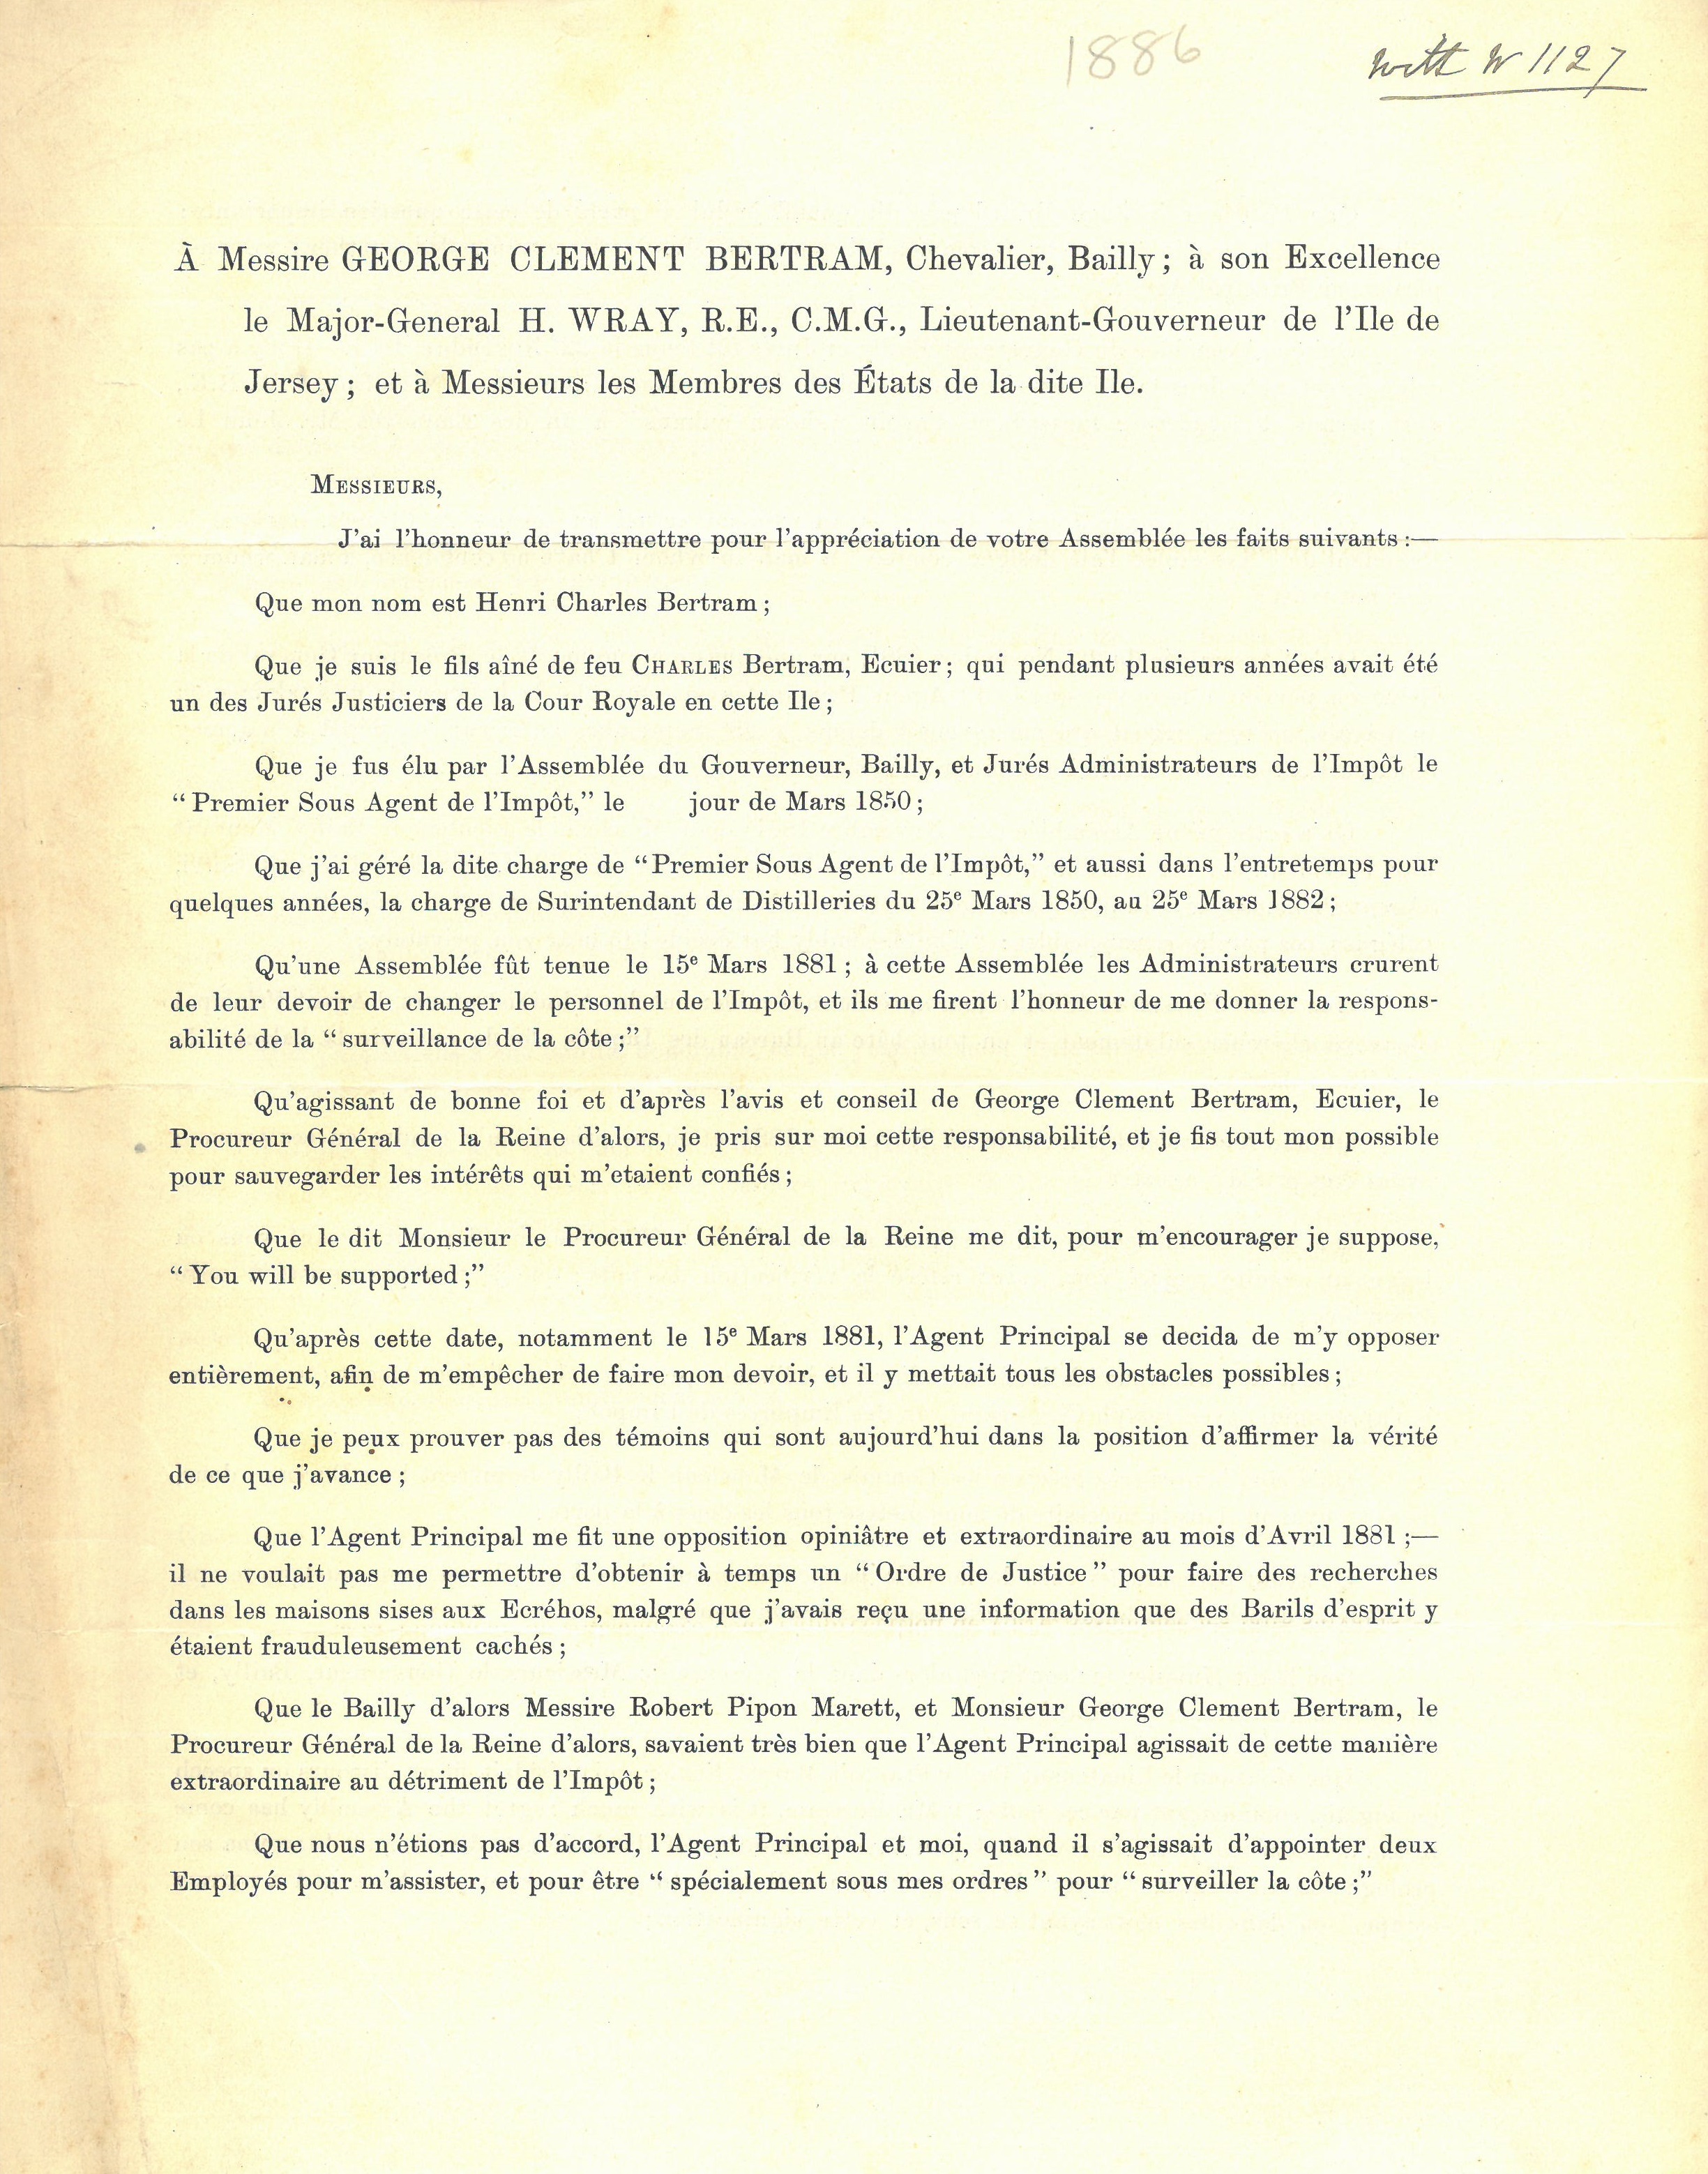 Henry_Charles_Bertrams_printed_letter_to_the_States_Assembly_explaining_his_grievances_1886_Jersey_Heritage.jpg